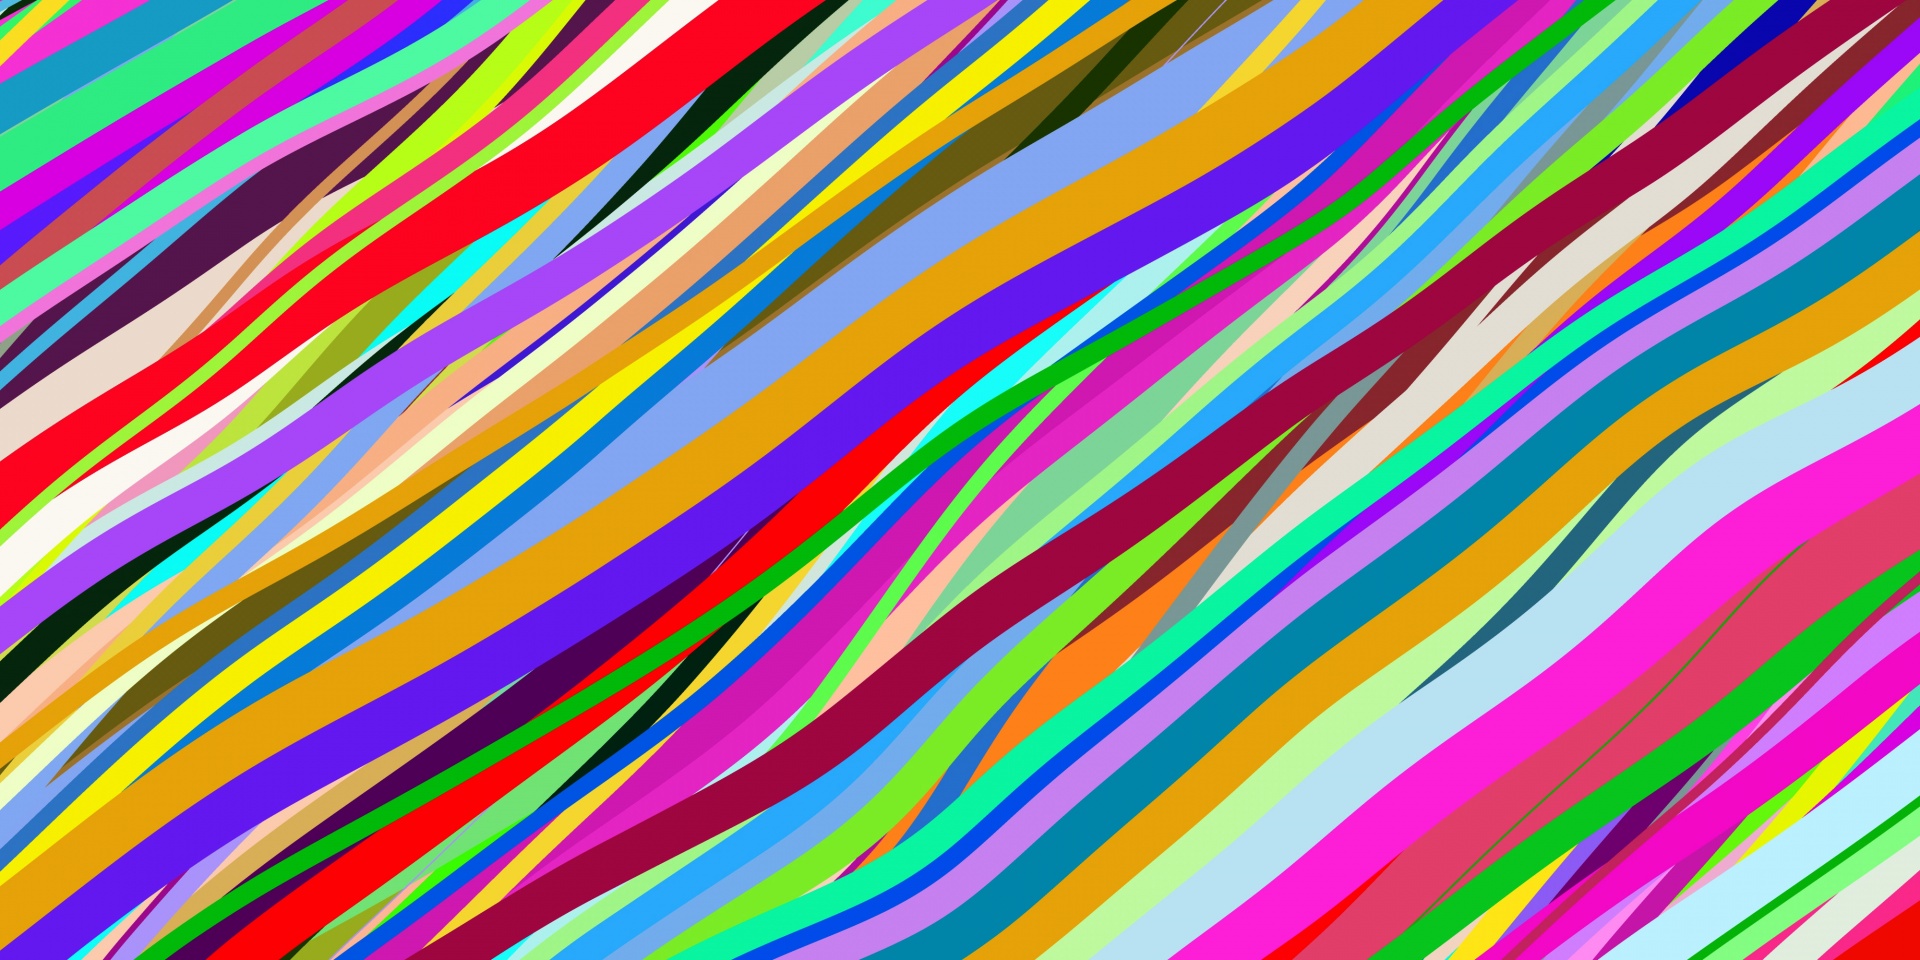 Streamers, Ribbons Colorful Clipart Free Stock Photo.